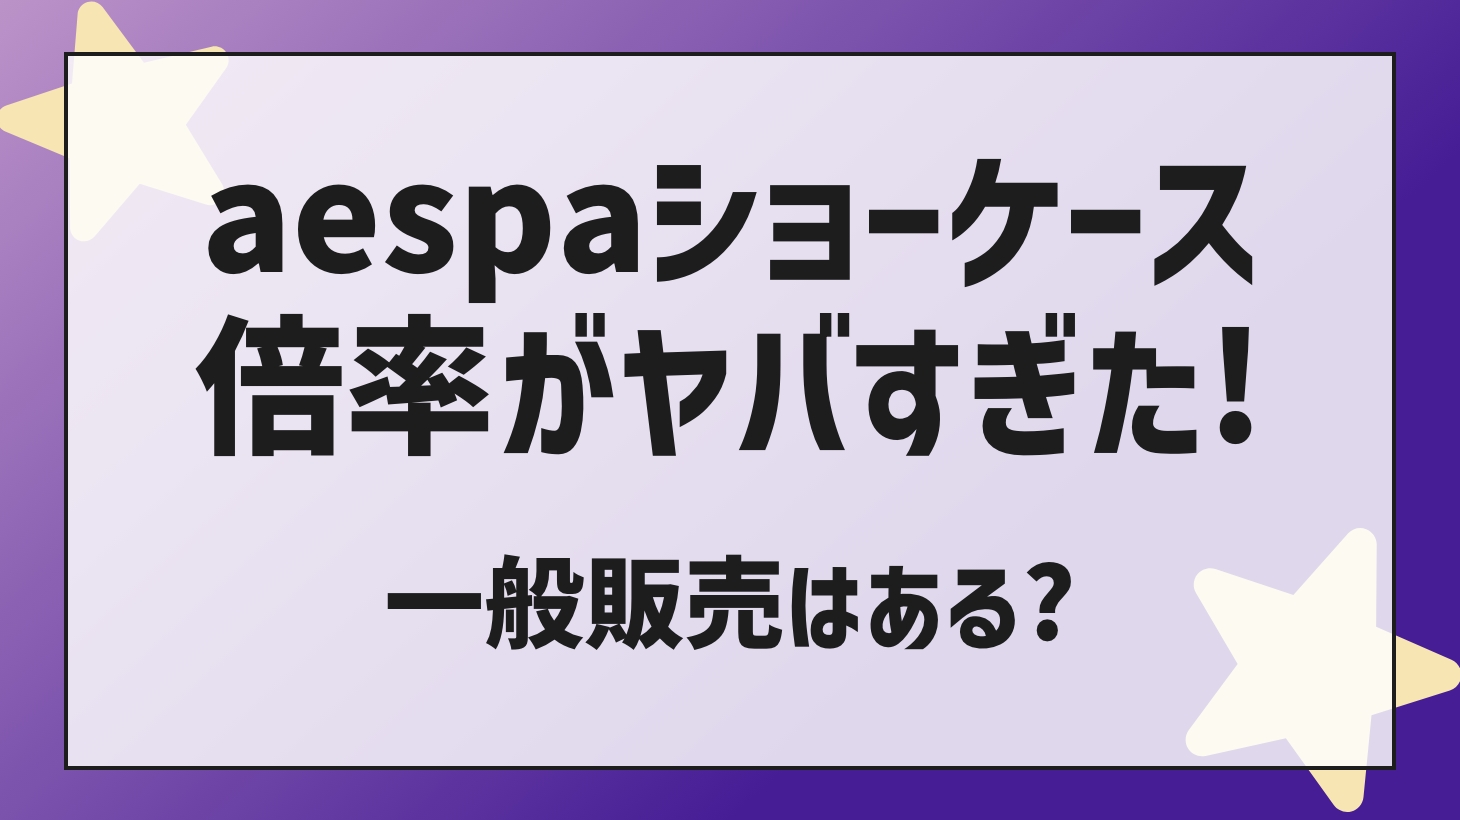 The aespa showcase magnification was too dangerous! Is there a general sale?